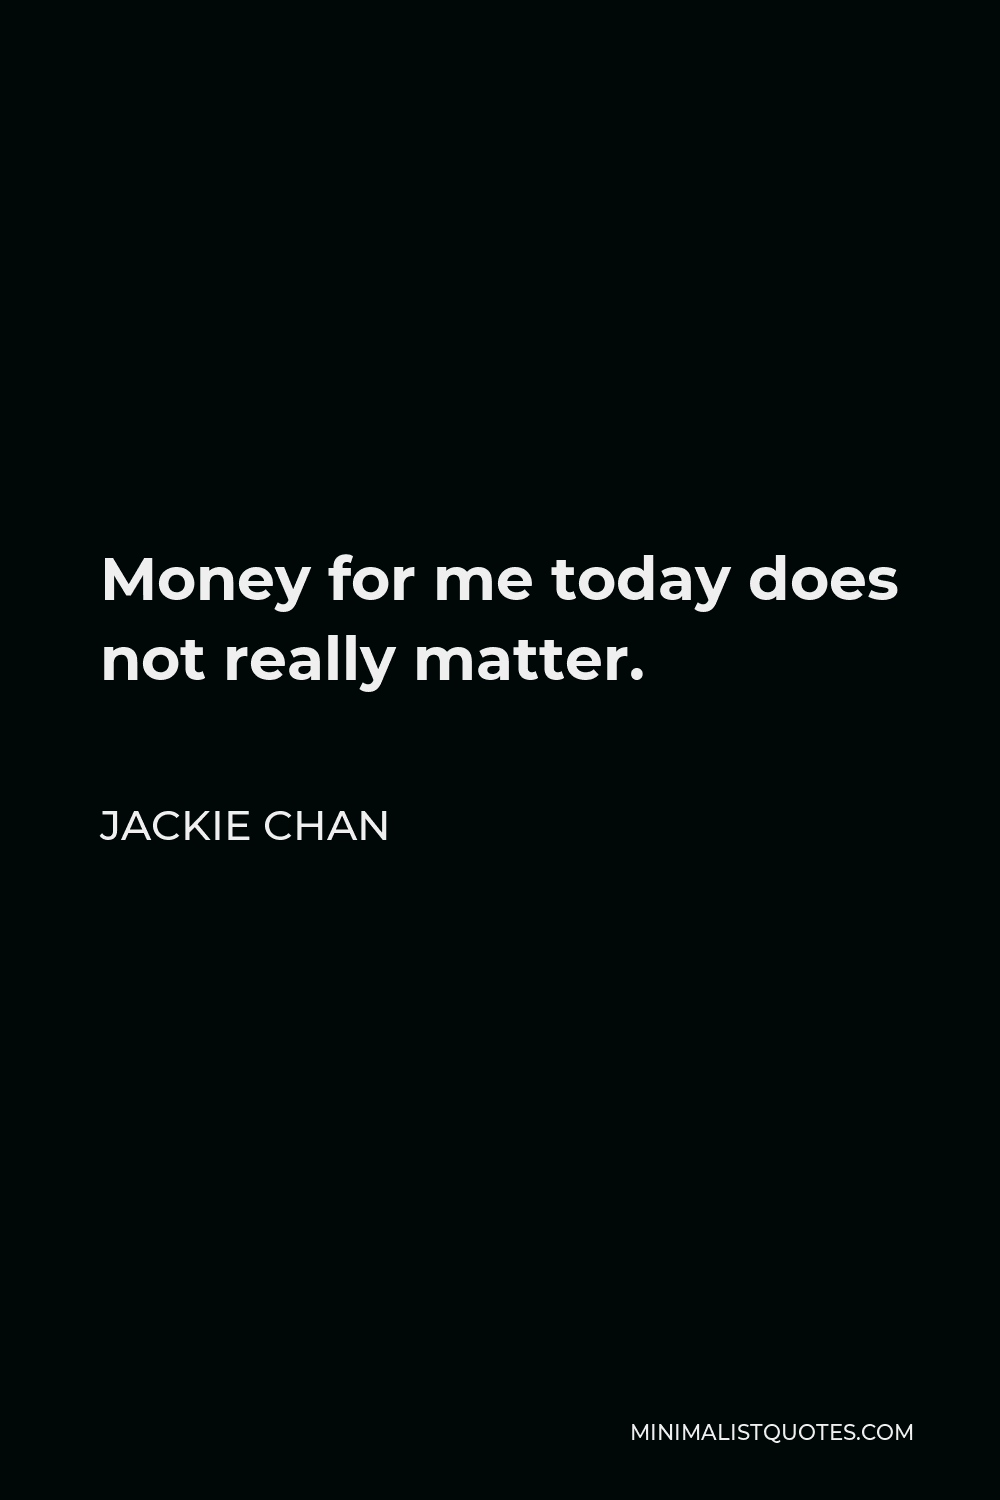 Jackie Chan Quote - Money for me today does not really matter.